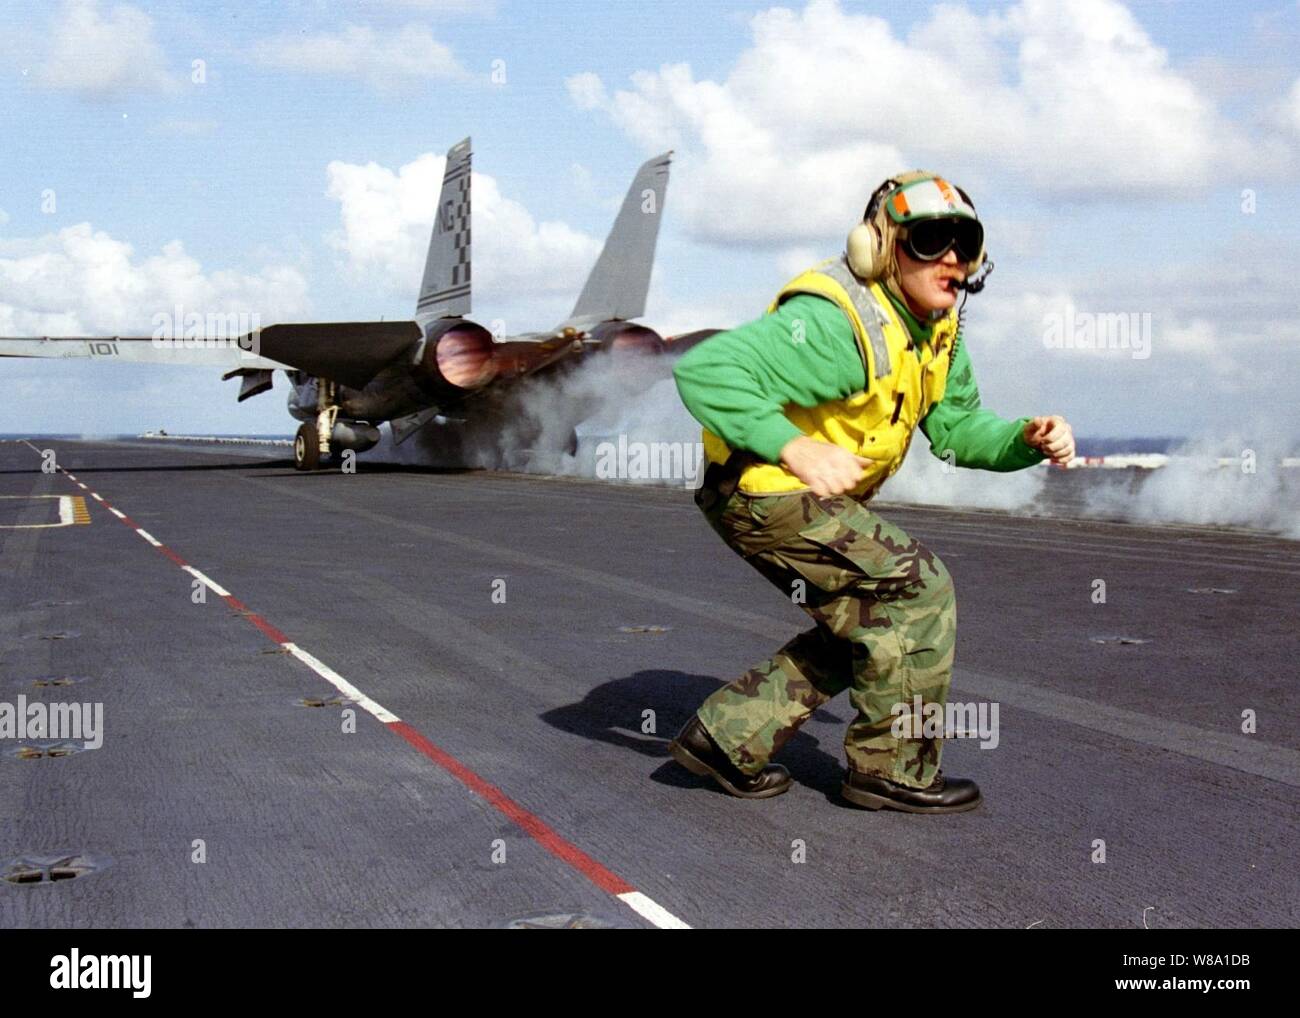 As a F-14 Tomcat roars down one of the four steam driven catapults of the aircraft carrier USS Nimitz (CVN 68) Petty Officer 1st Class John Macaby moves quickly to ready the next aircraft for launch during flight operations in the Persian Gulf on Nov. 4, 1997.  The Nimitz and embarked Carrier Air Wing 9 are operating in the Persian Gulf in support of the U.S. and coalition enforcement of the no-fly-zone over Southern Iraq. Macaby, from Kent, Wash., is a Navy aviation boatswainХs mate (equipment). Stock Photo